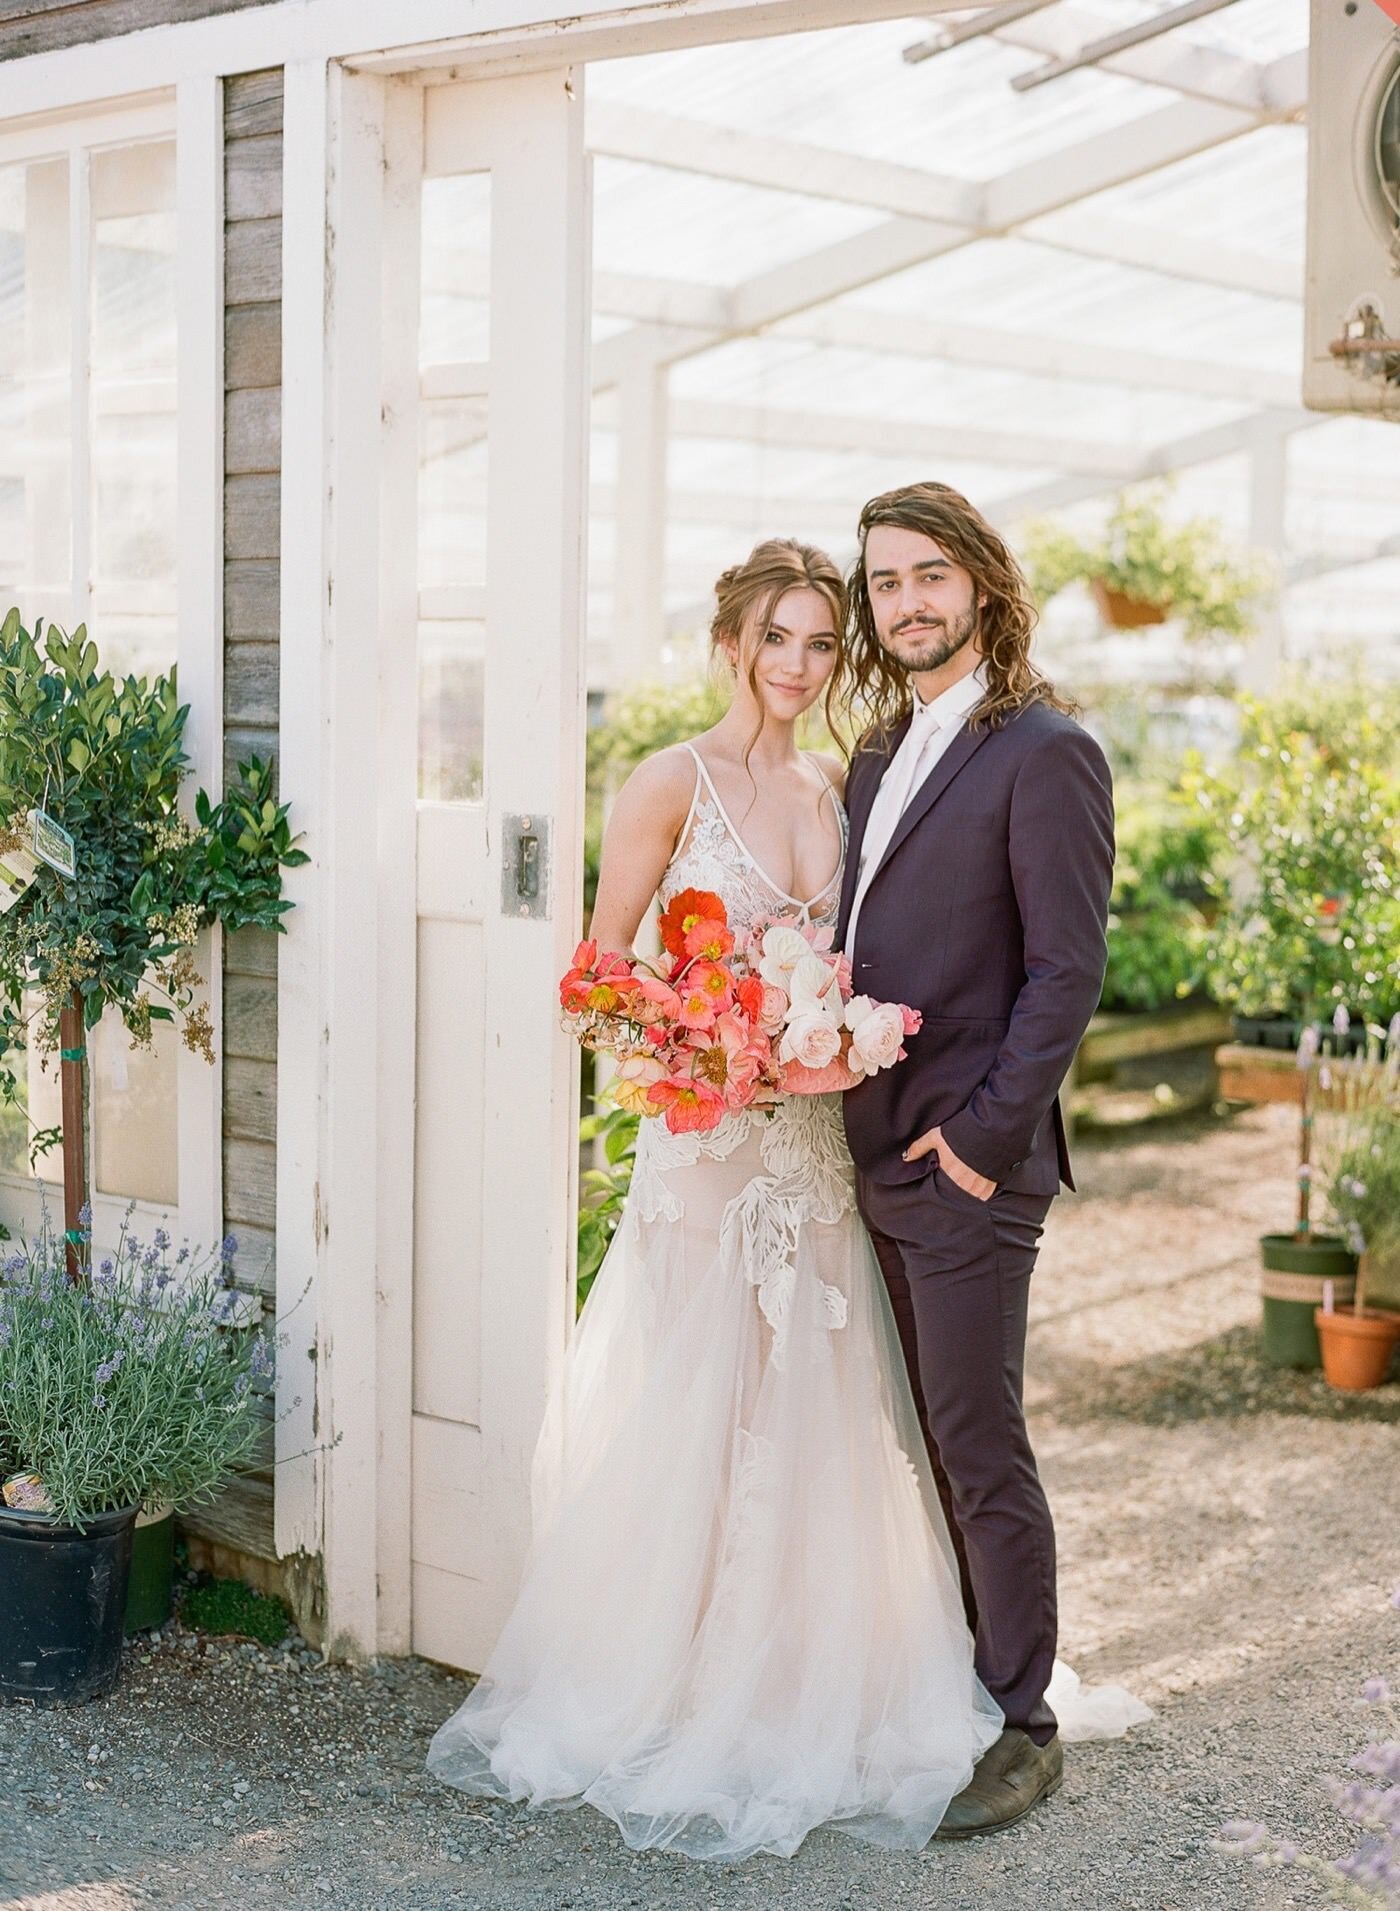 A colorful and stylish wedding couple at Christianson's Nursery